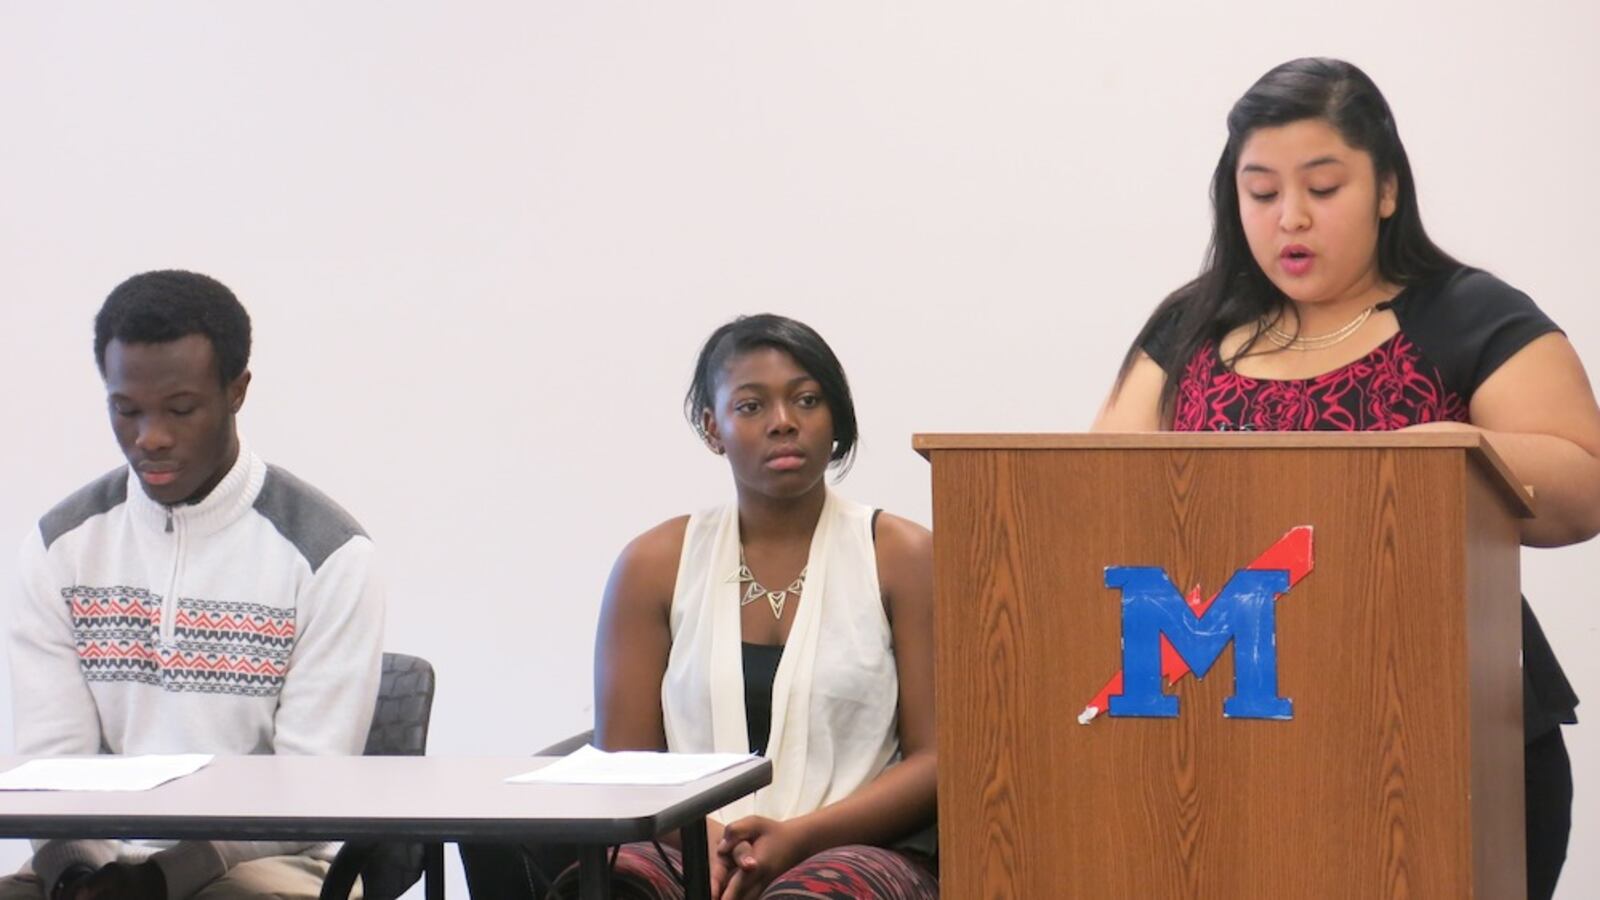 Students at Manual gave speeches about Ferguson to an audience that included police officers and elected officials.